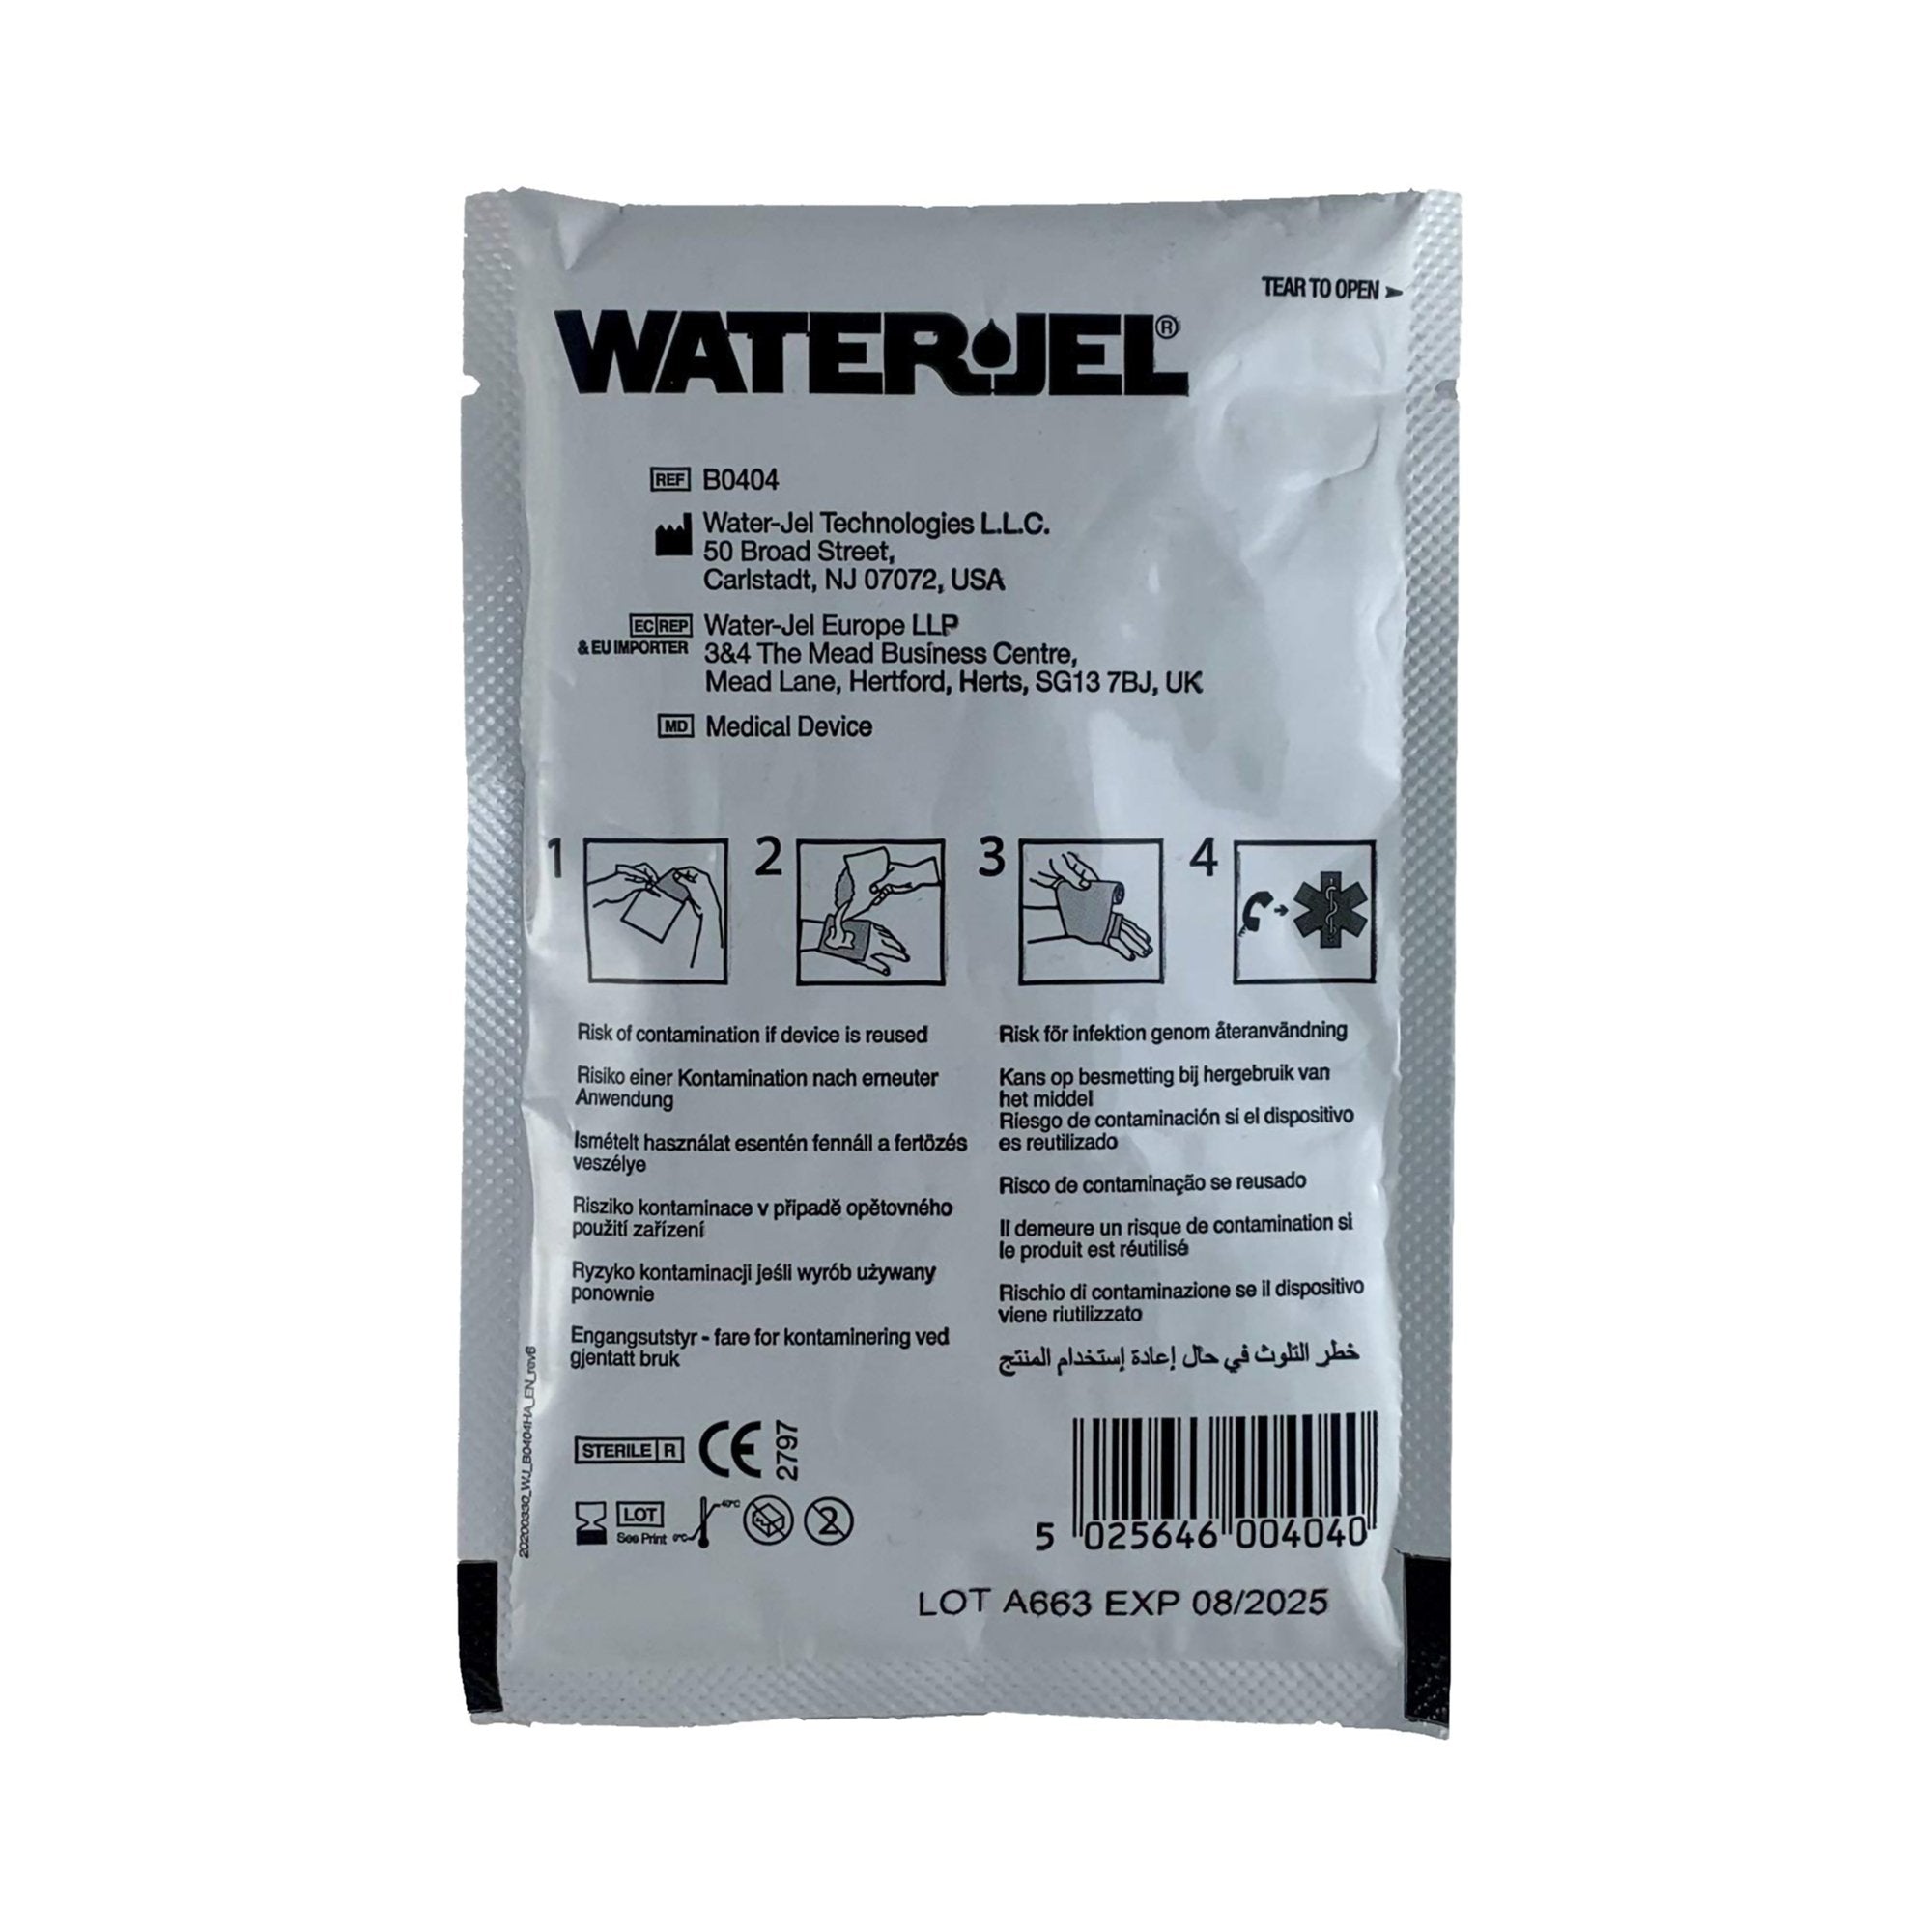 Burn Dressing Water-Jel First Responder 4 X 4 Inch Square Sterile